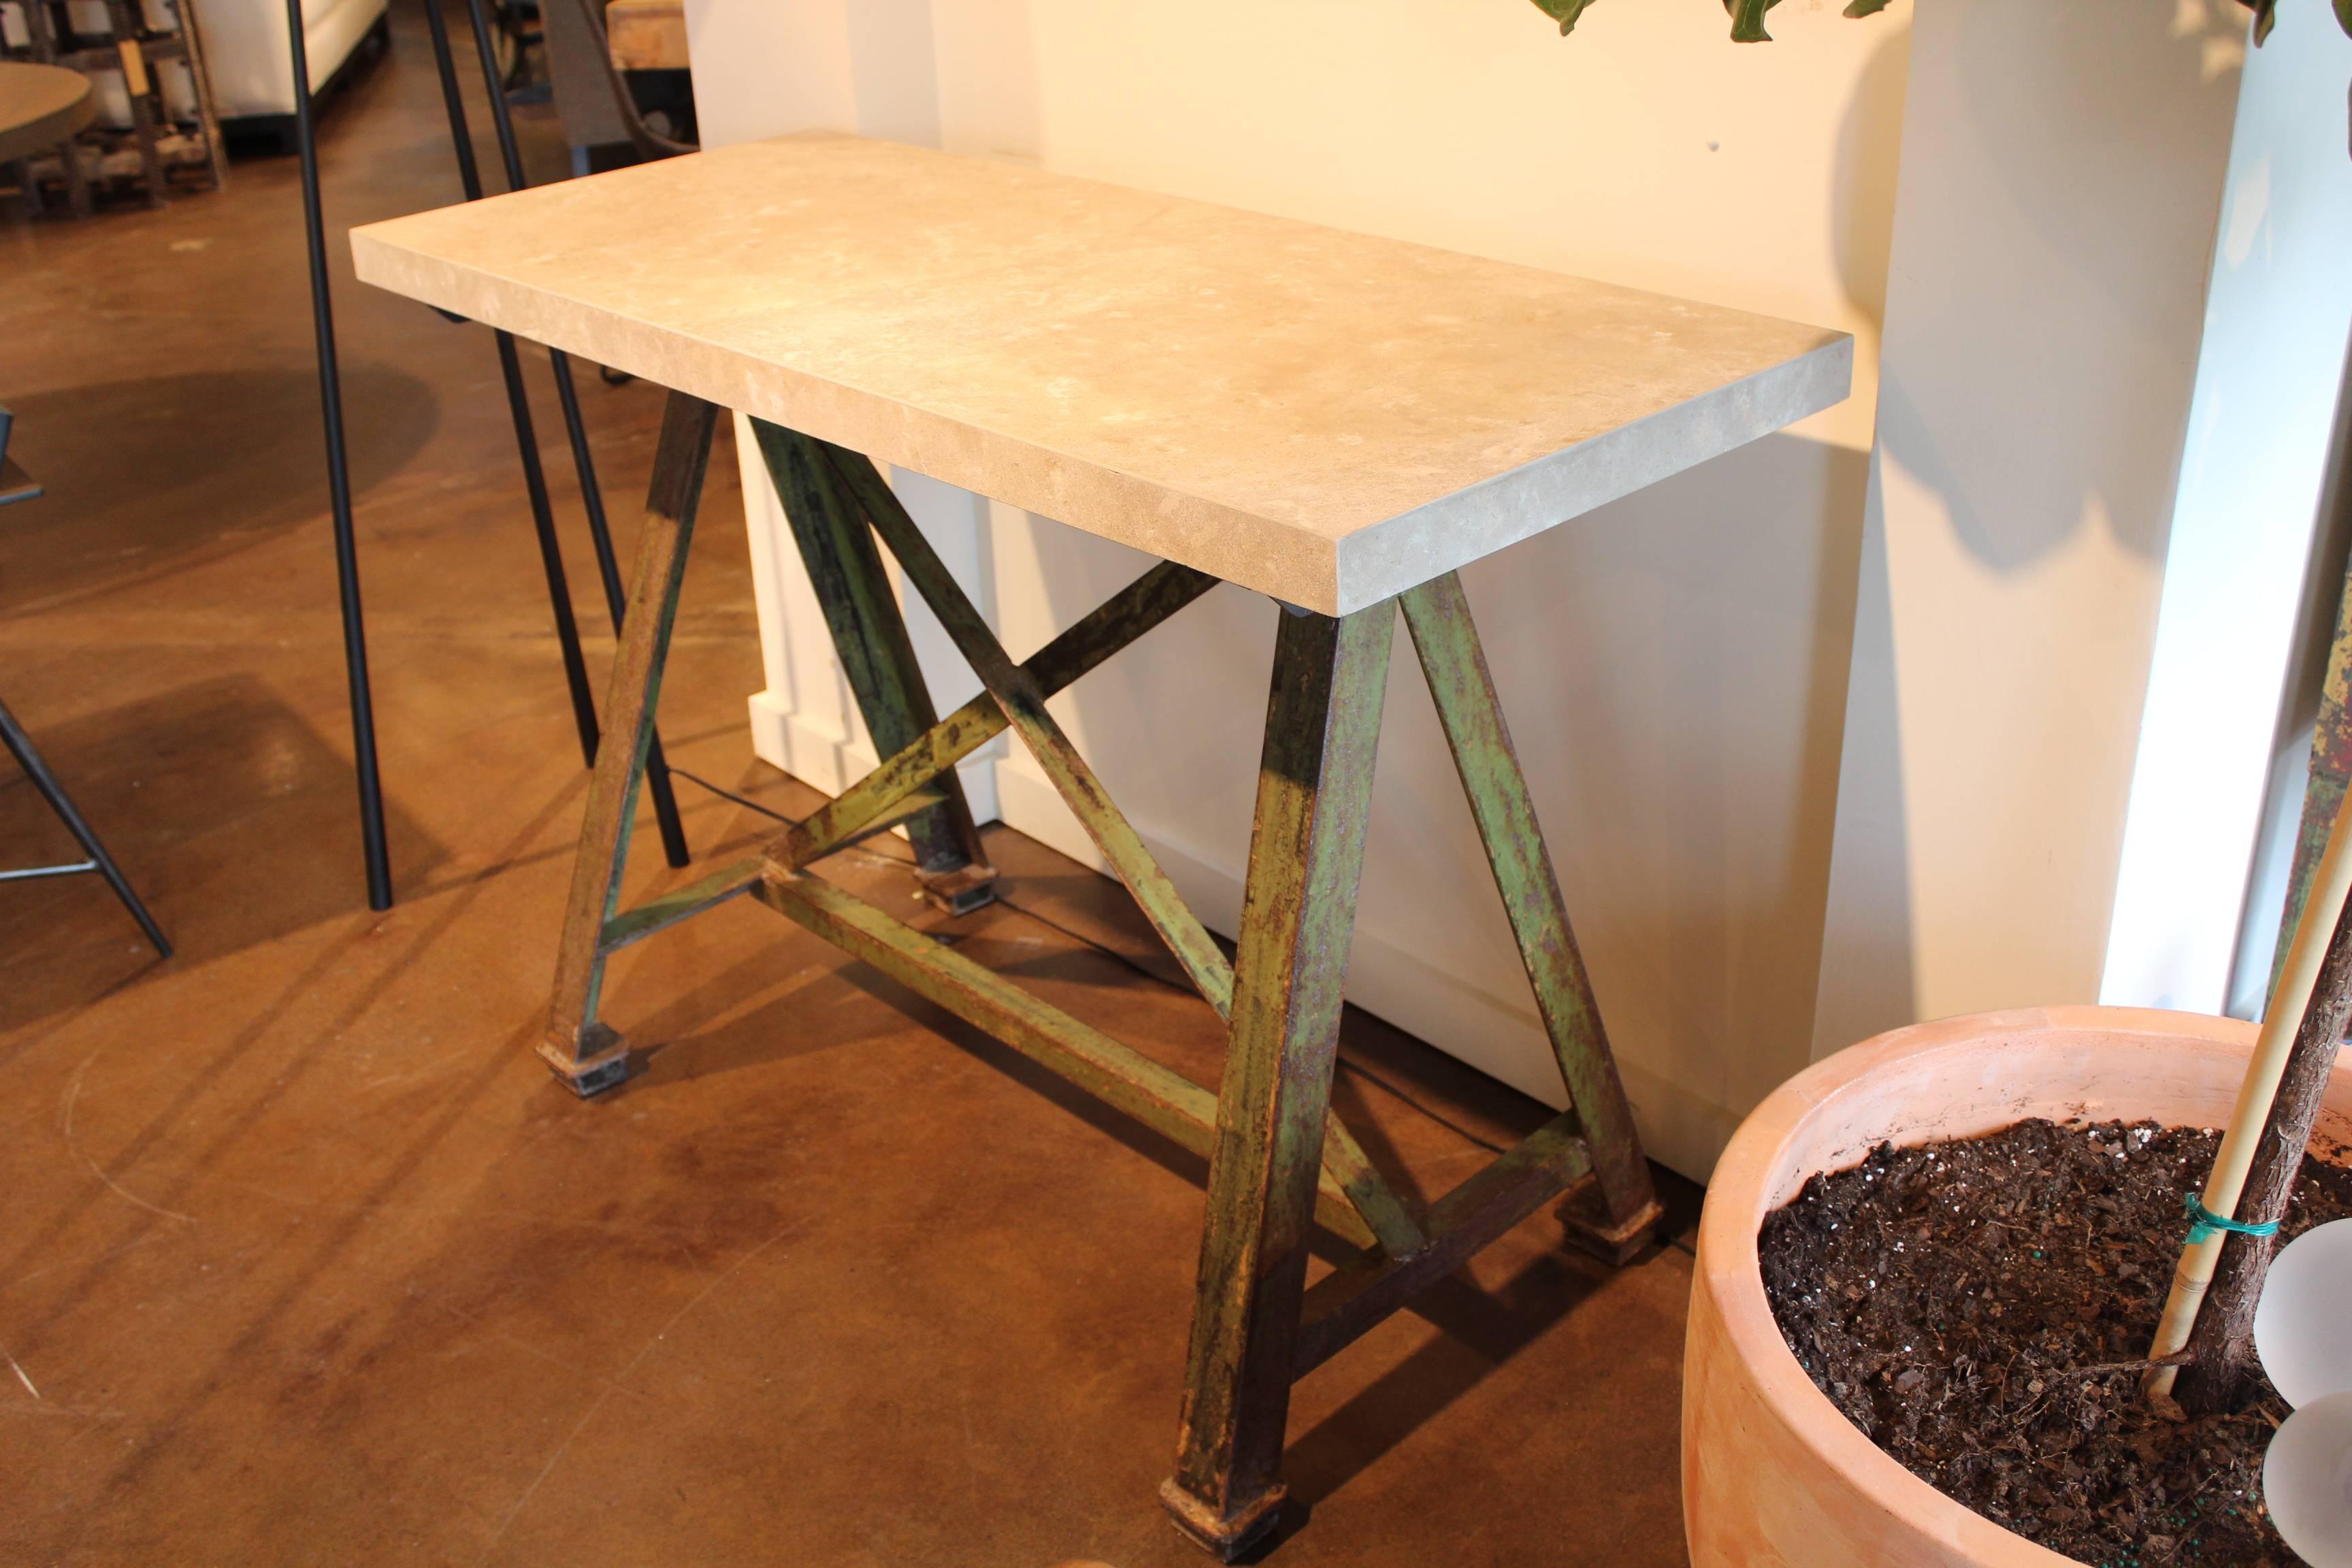 Original paint patina base re-purposed to hold vintage limestone top formerly used in French bakery.